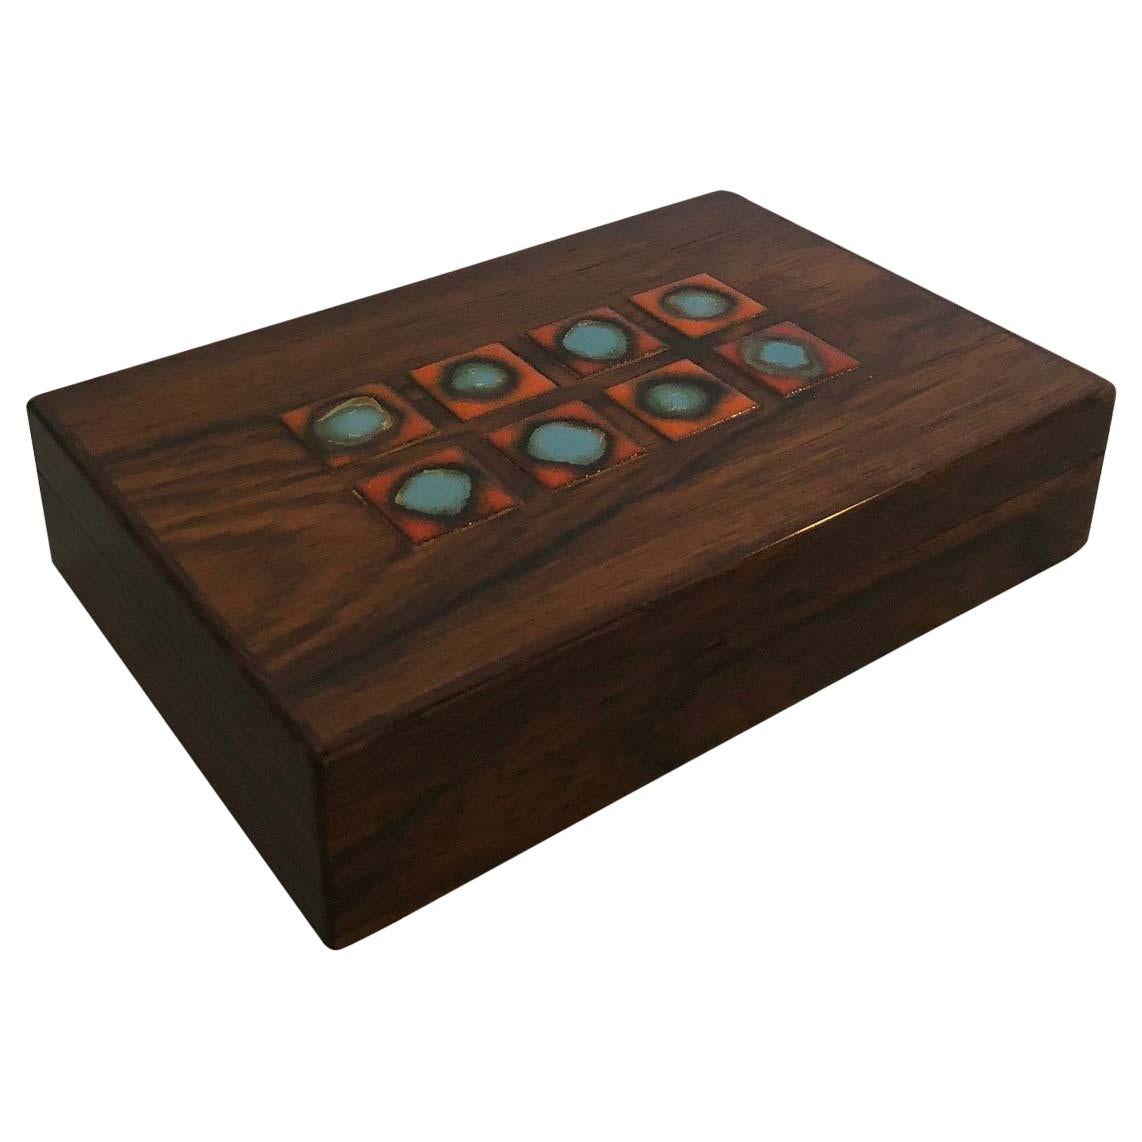 Bodil Eje Danish Rosewood Box / Humidor by Alfred Klitgaard For Sale